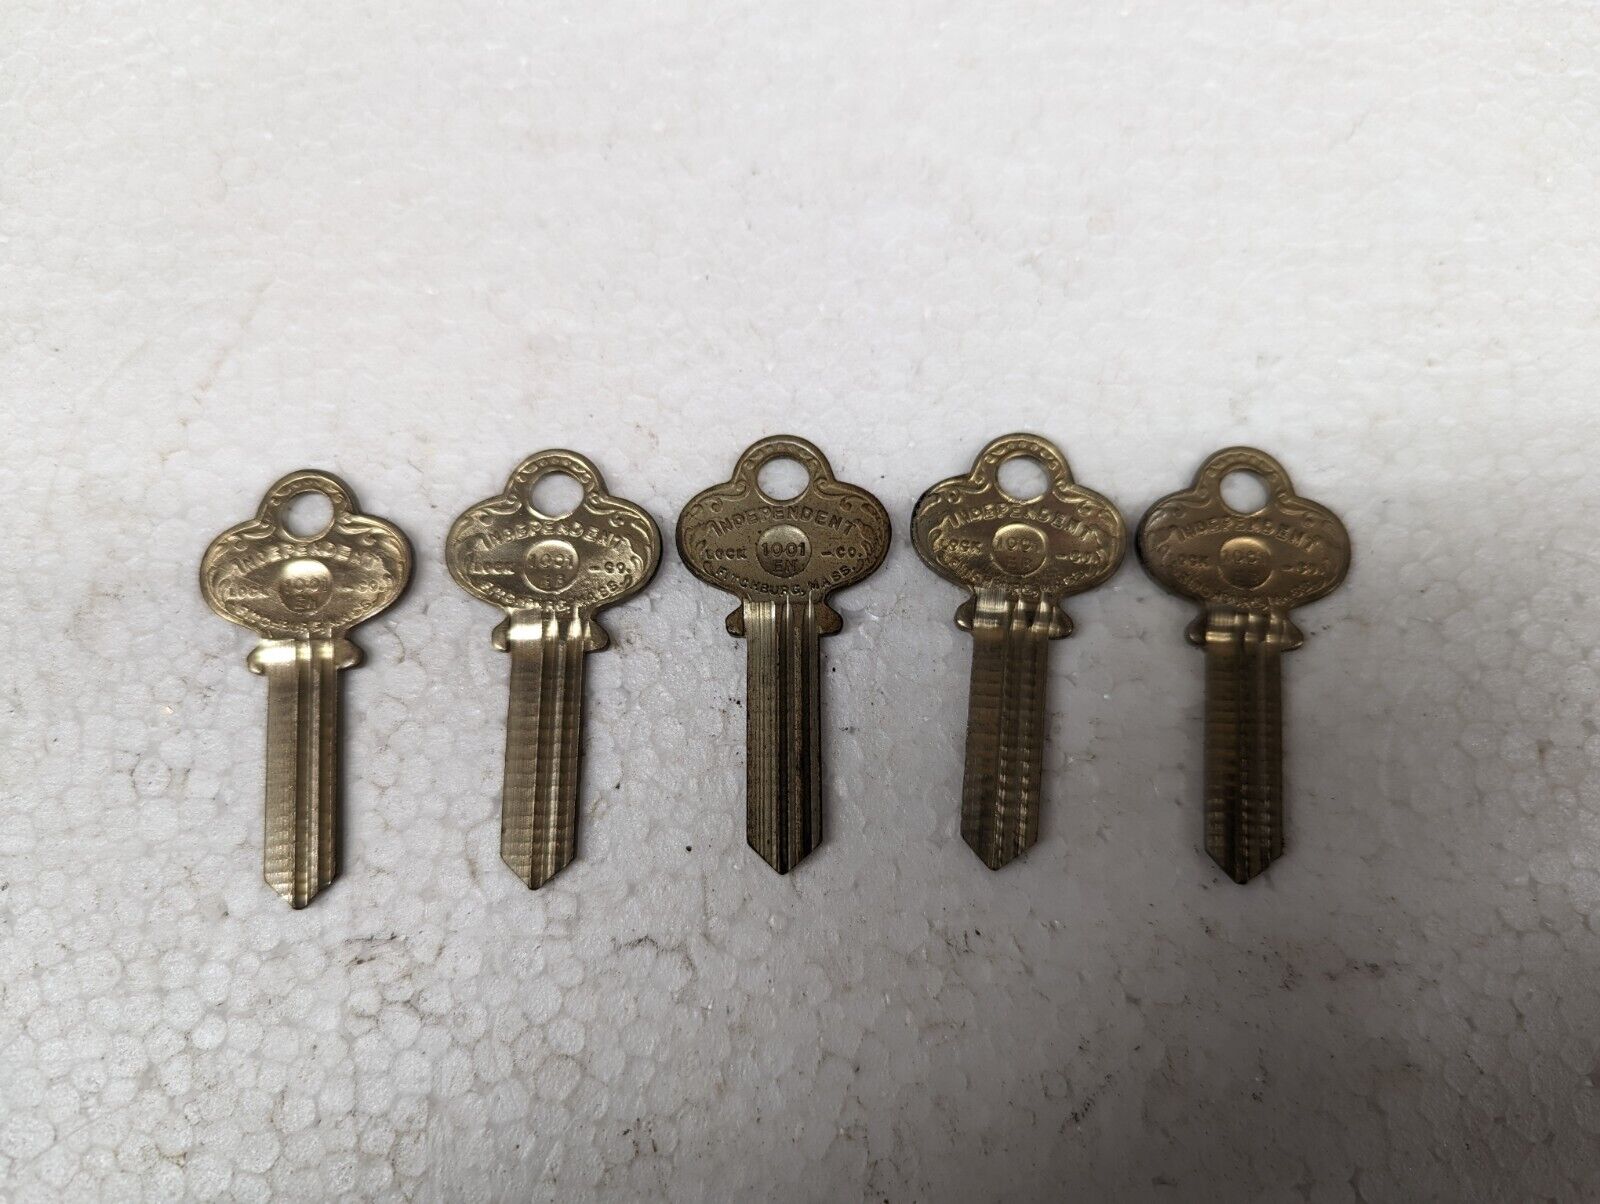 Lot of 5 Vintage Independent Lock Co/ILCO CO-3 Key Blanks, 5-Pin, Uncut USA